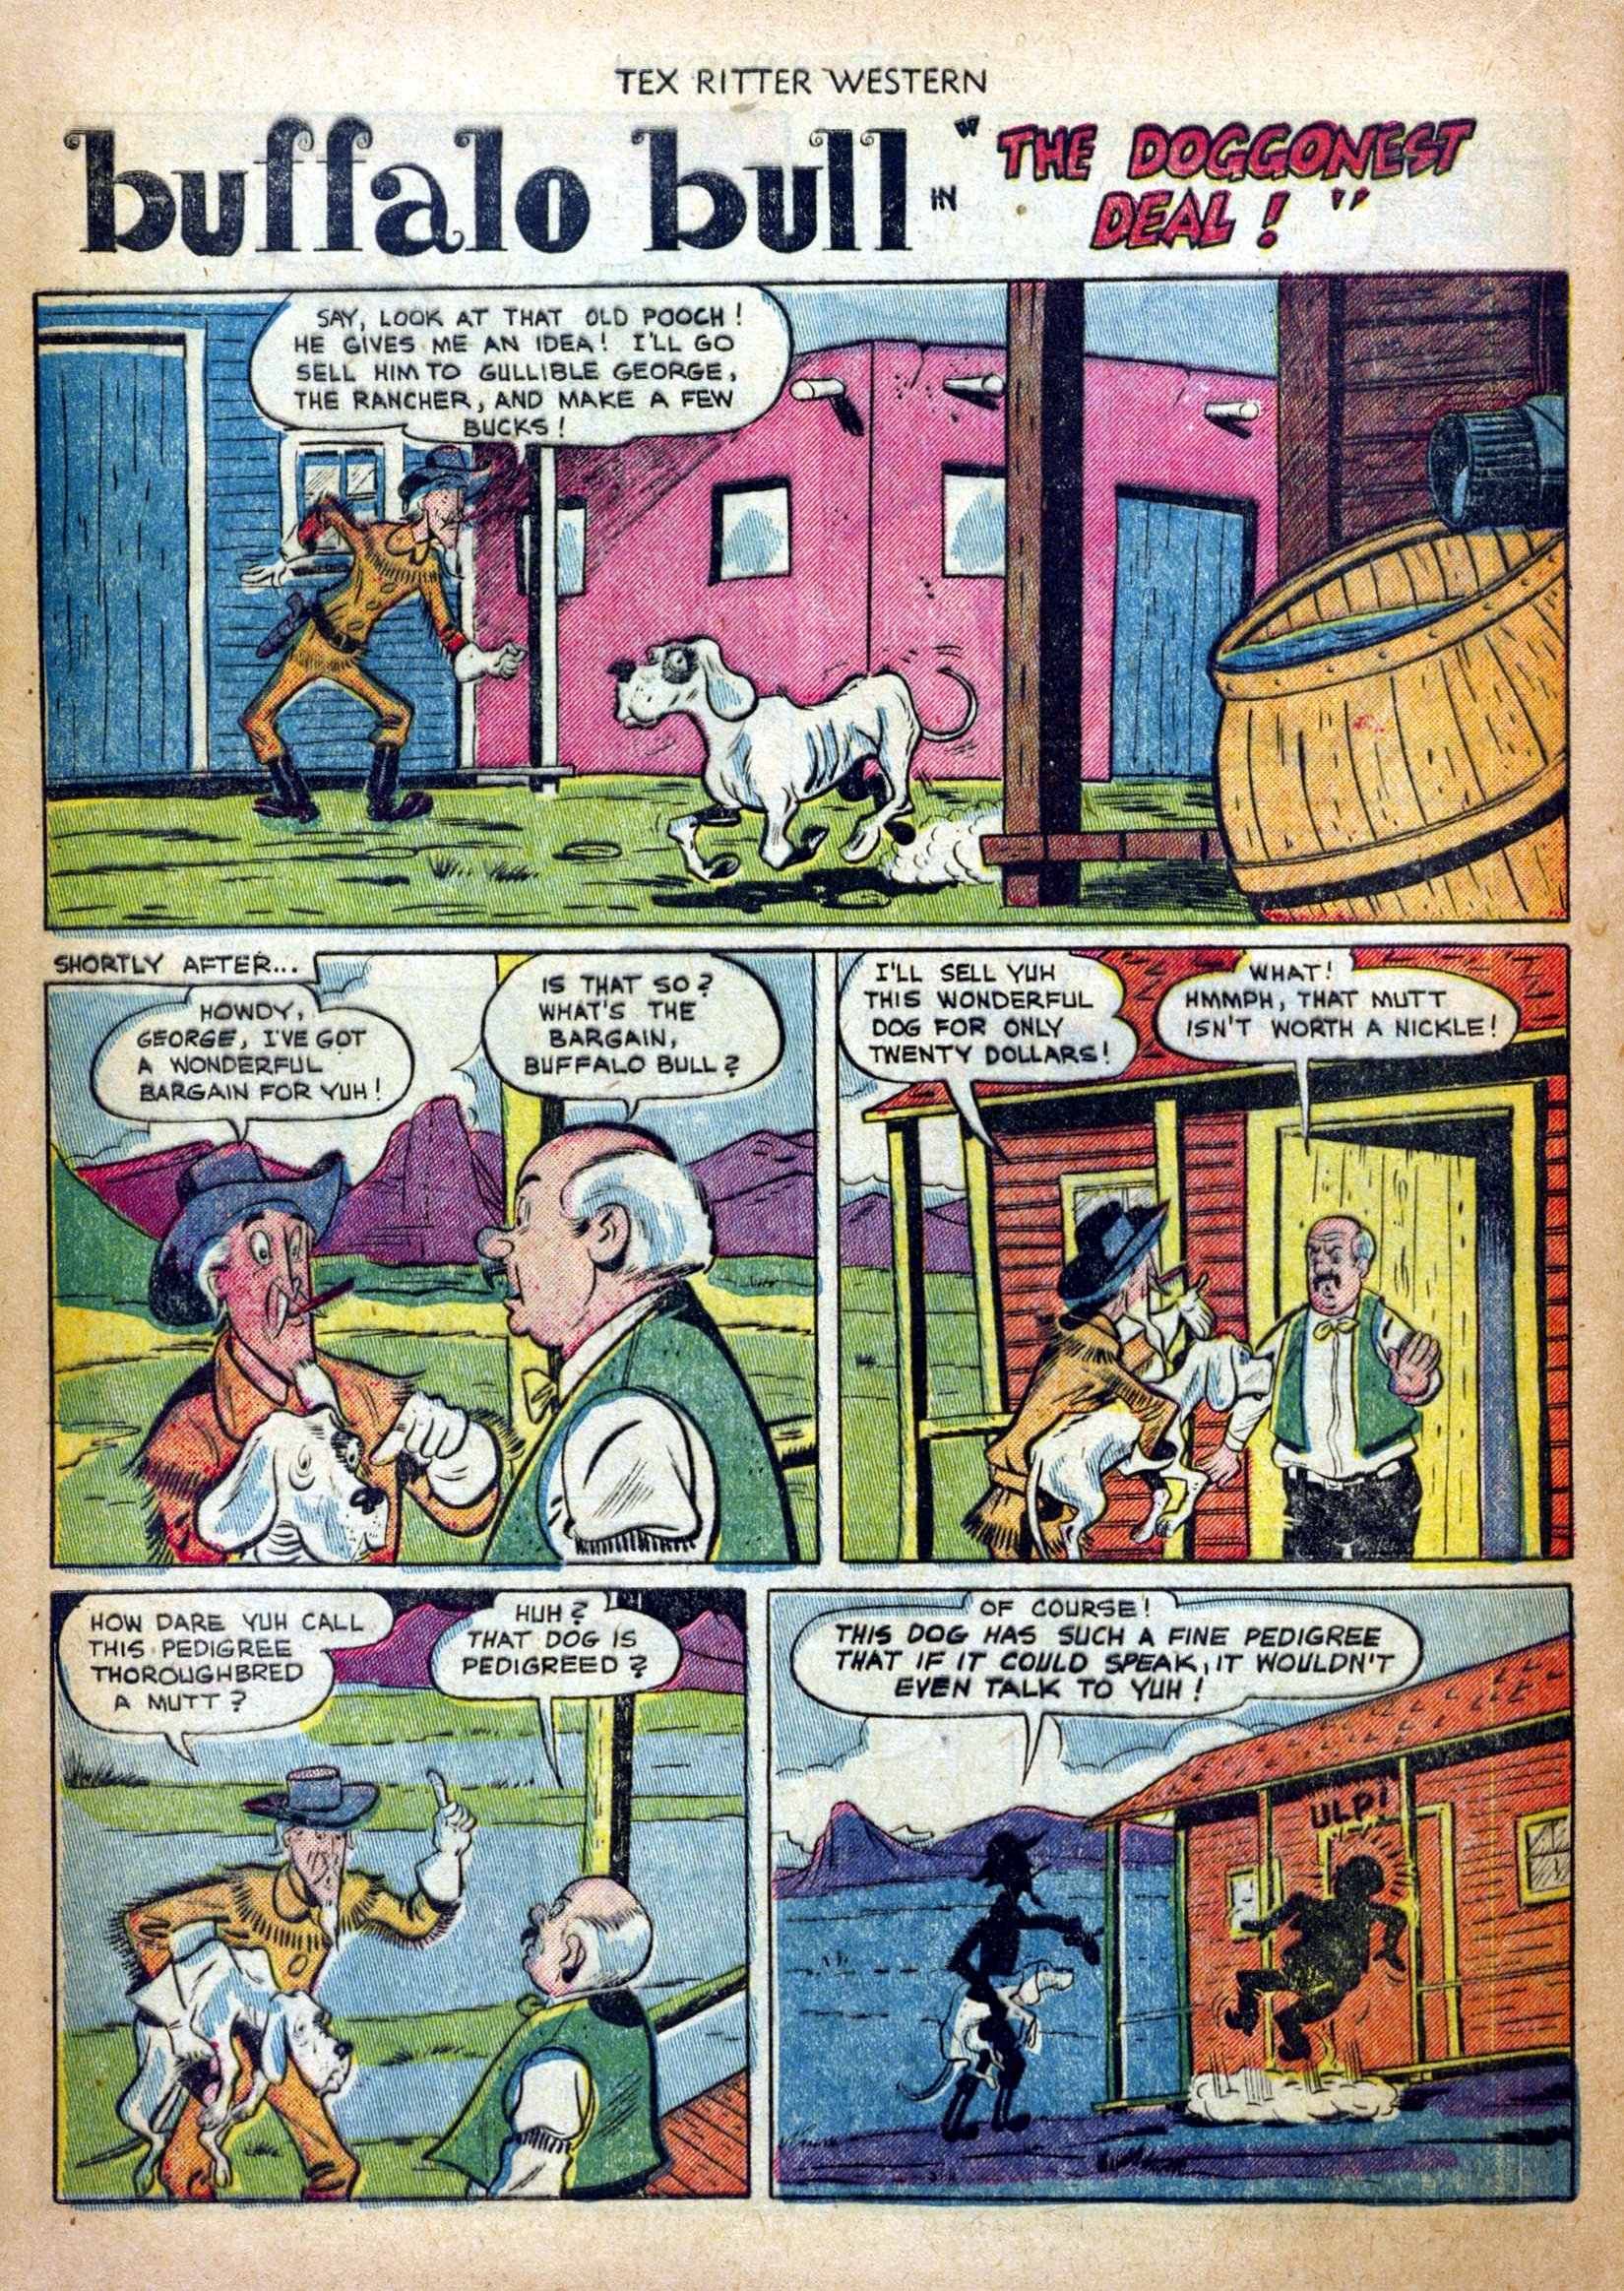 Read online Tex Ritter Western comic -  Issue #11 - 22